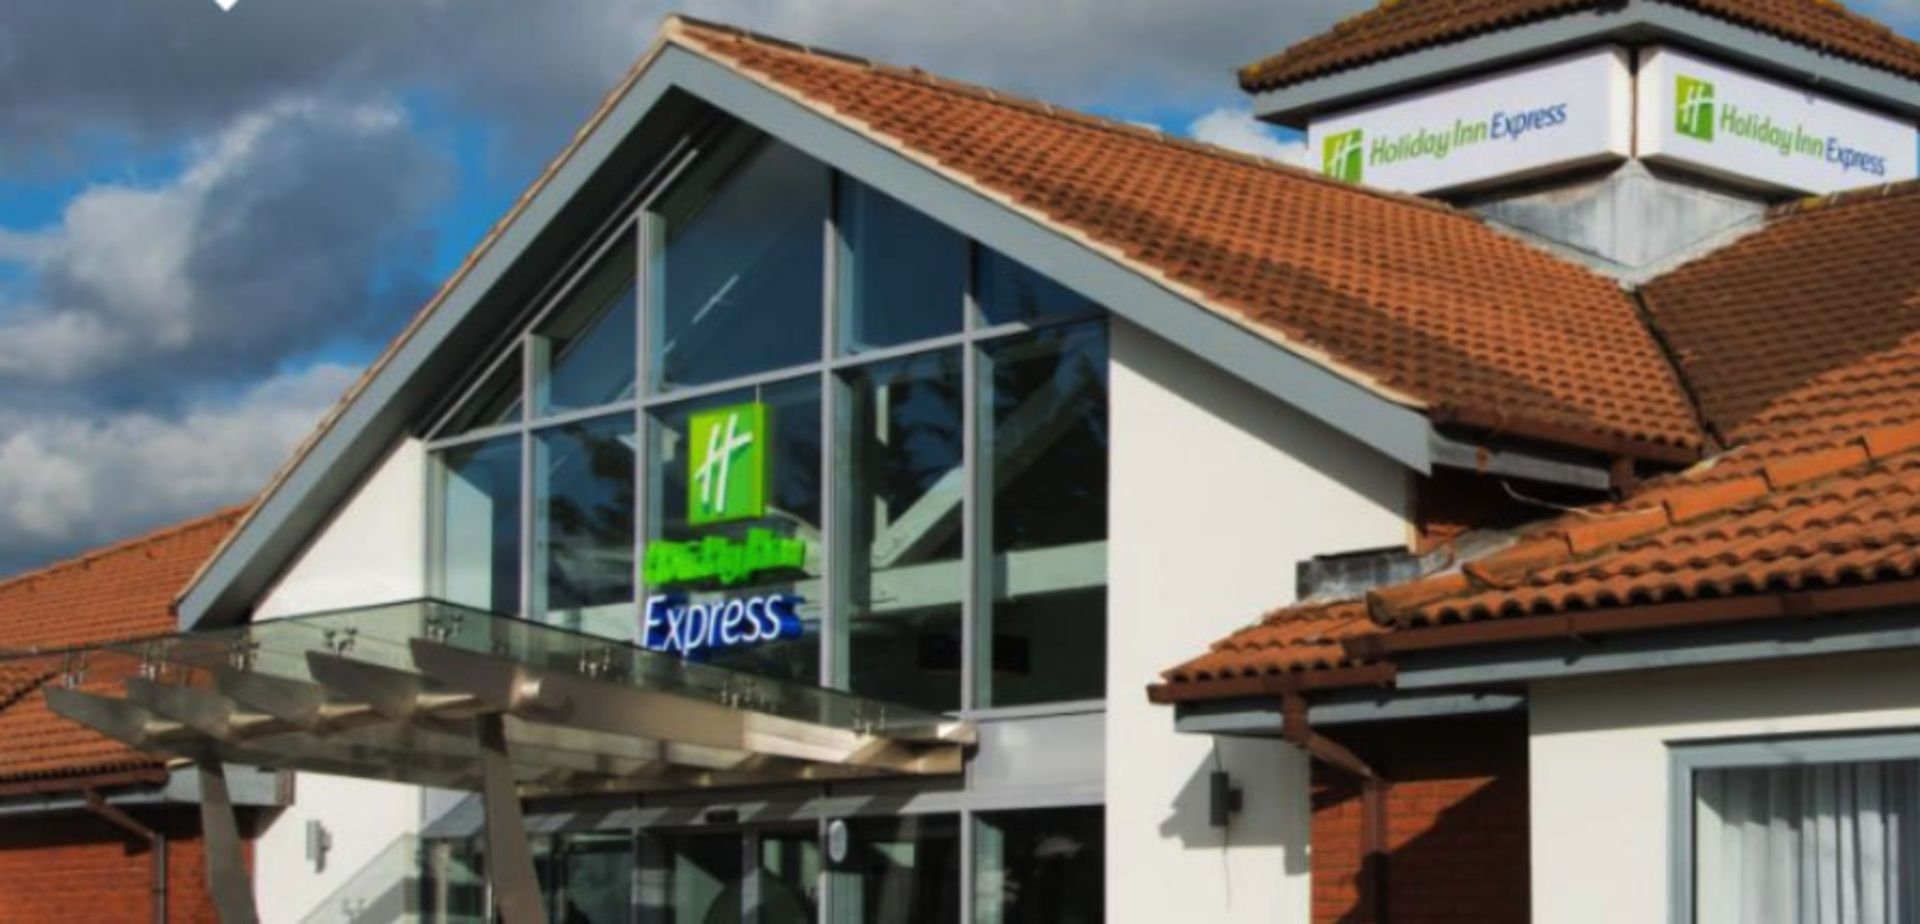 Two nights at the 3* Holiday Inn Express Portsmouth North.